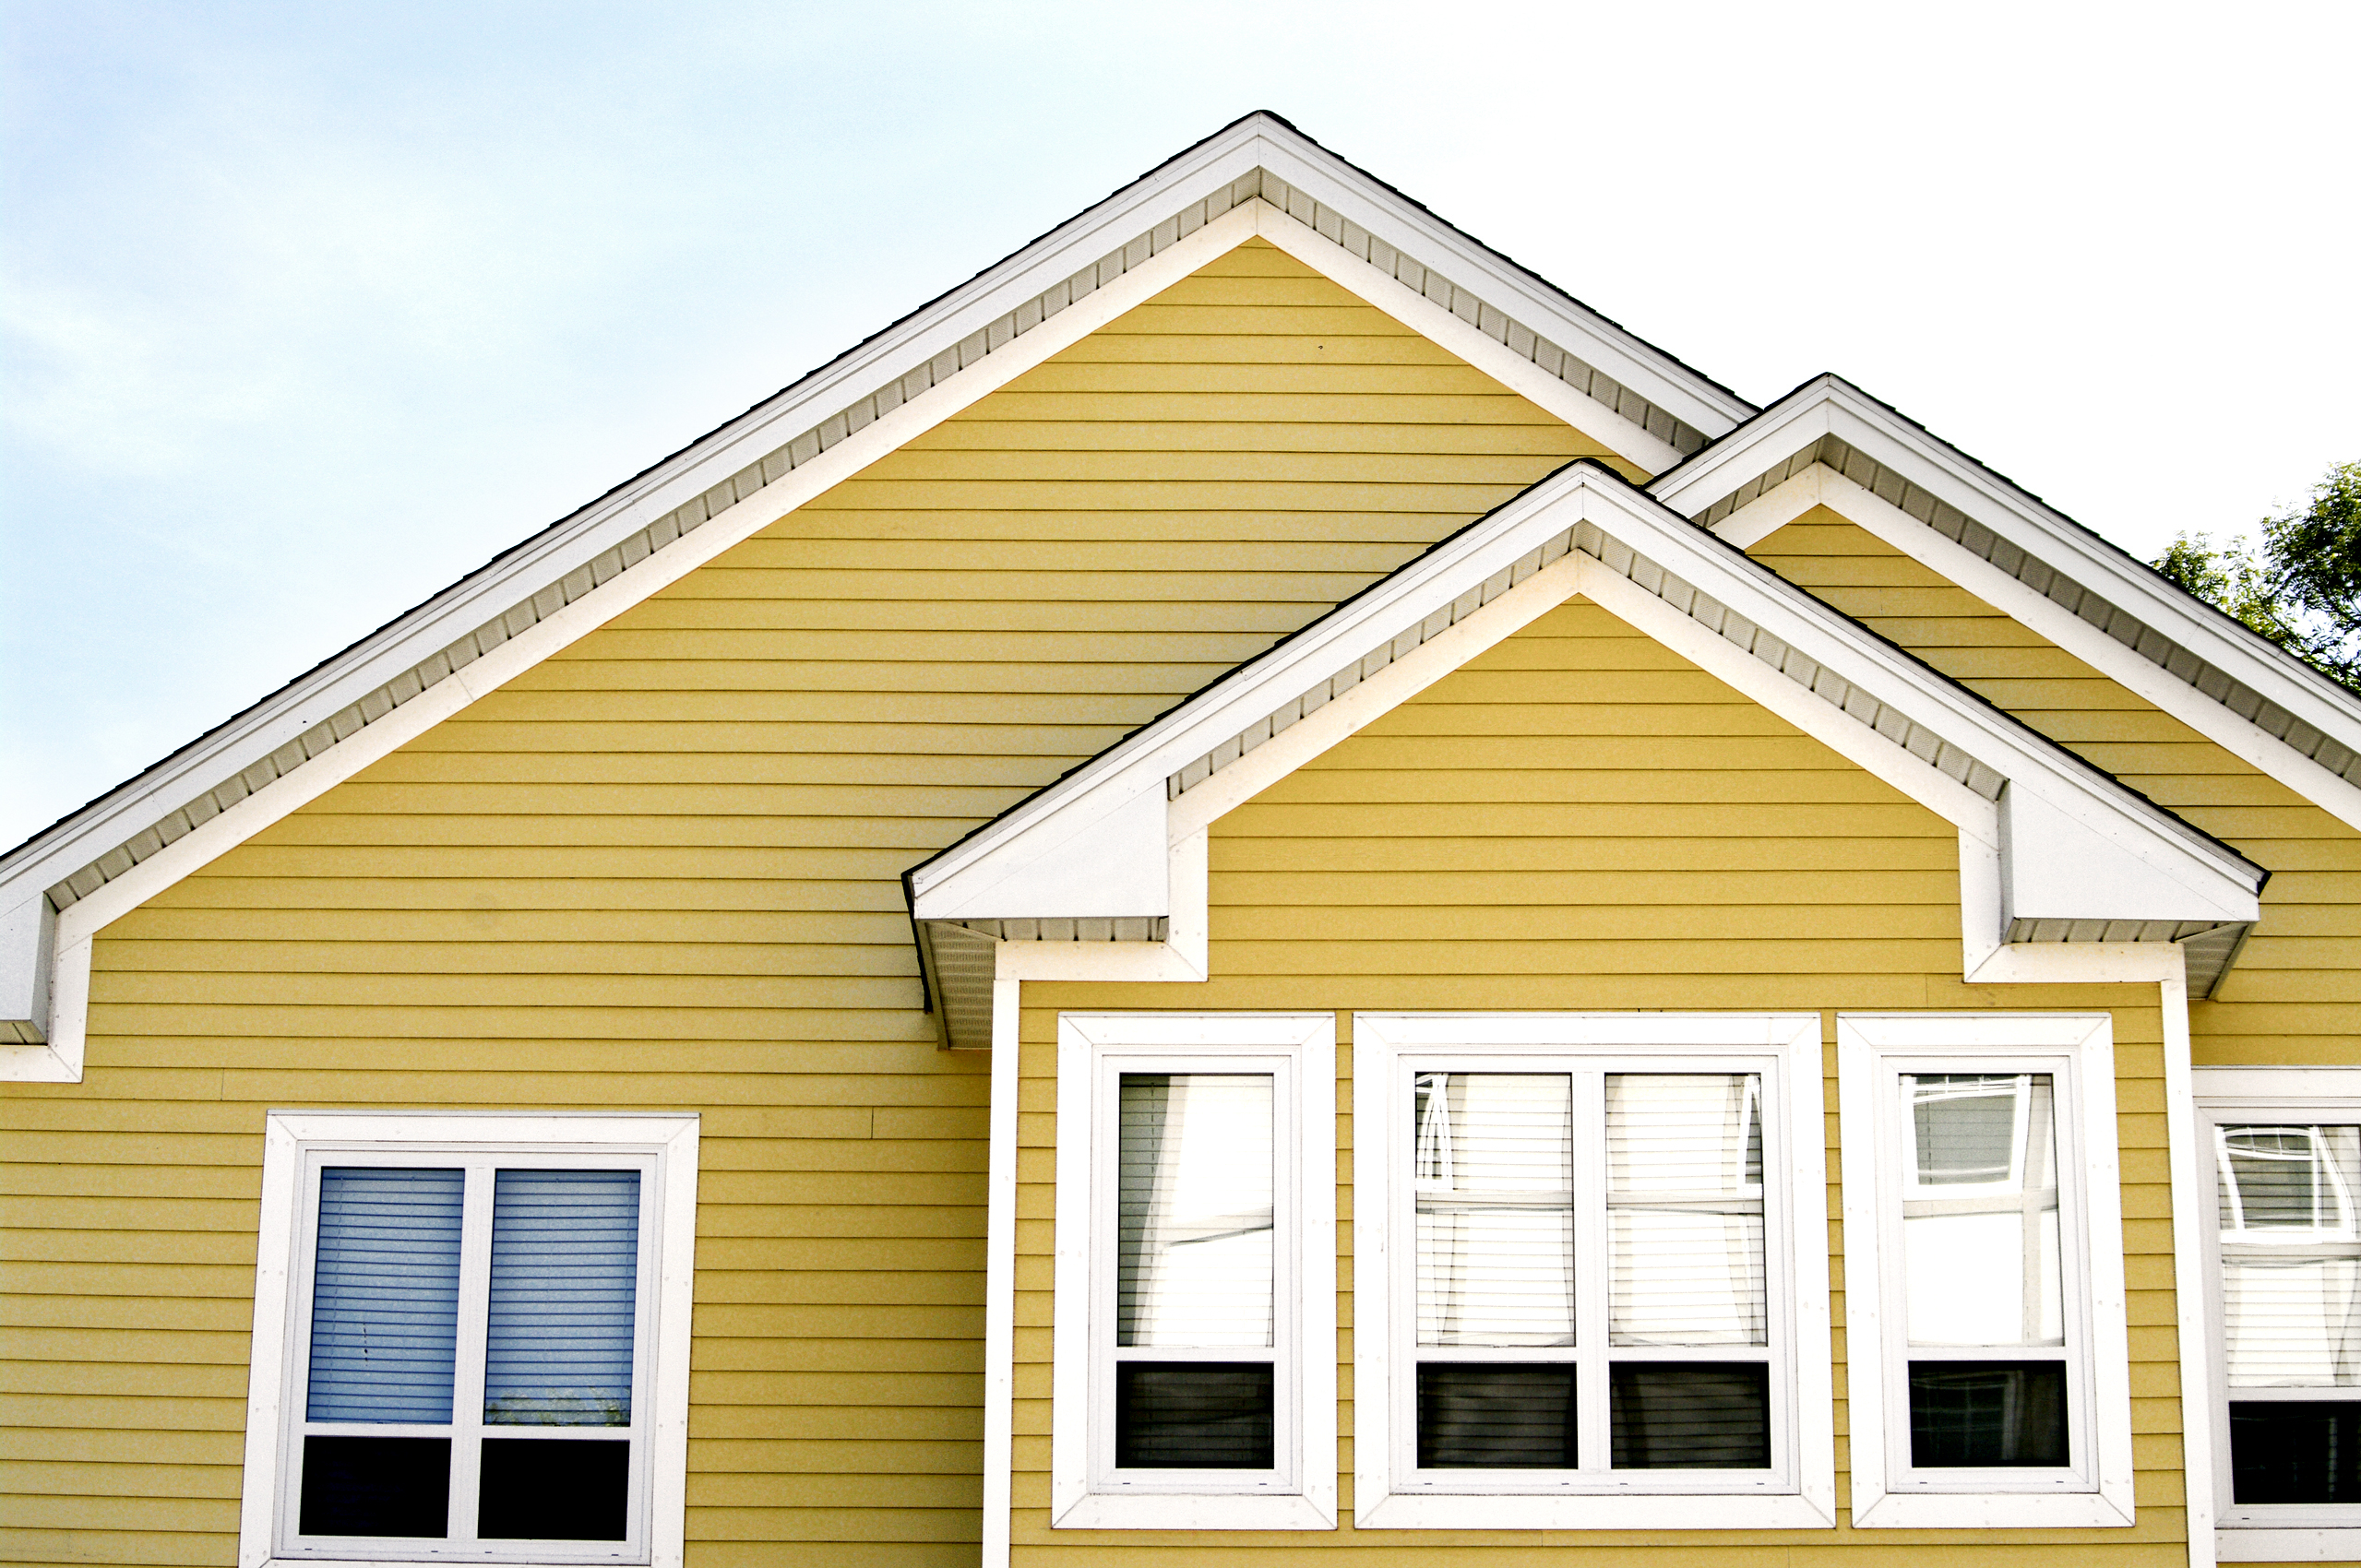 Hardie plank siding is more durable than wood